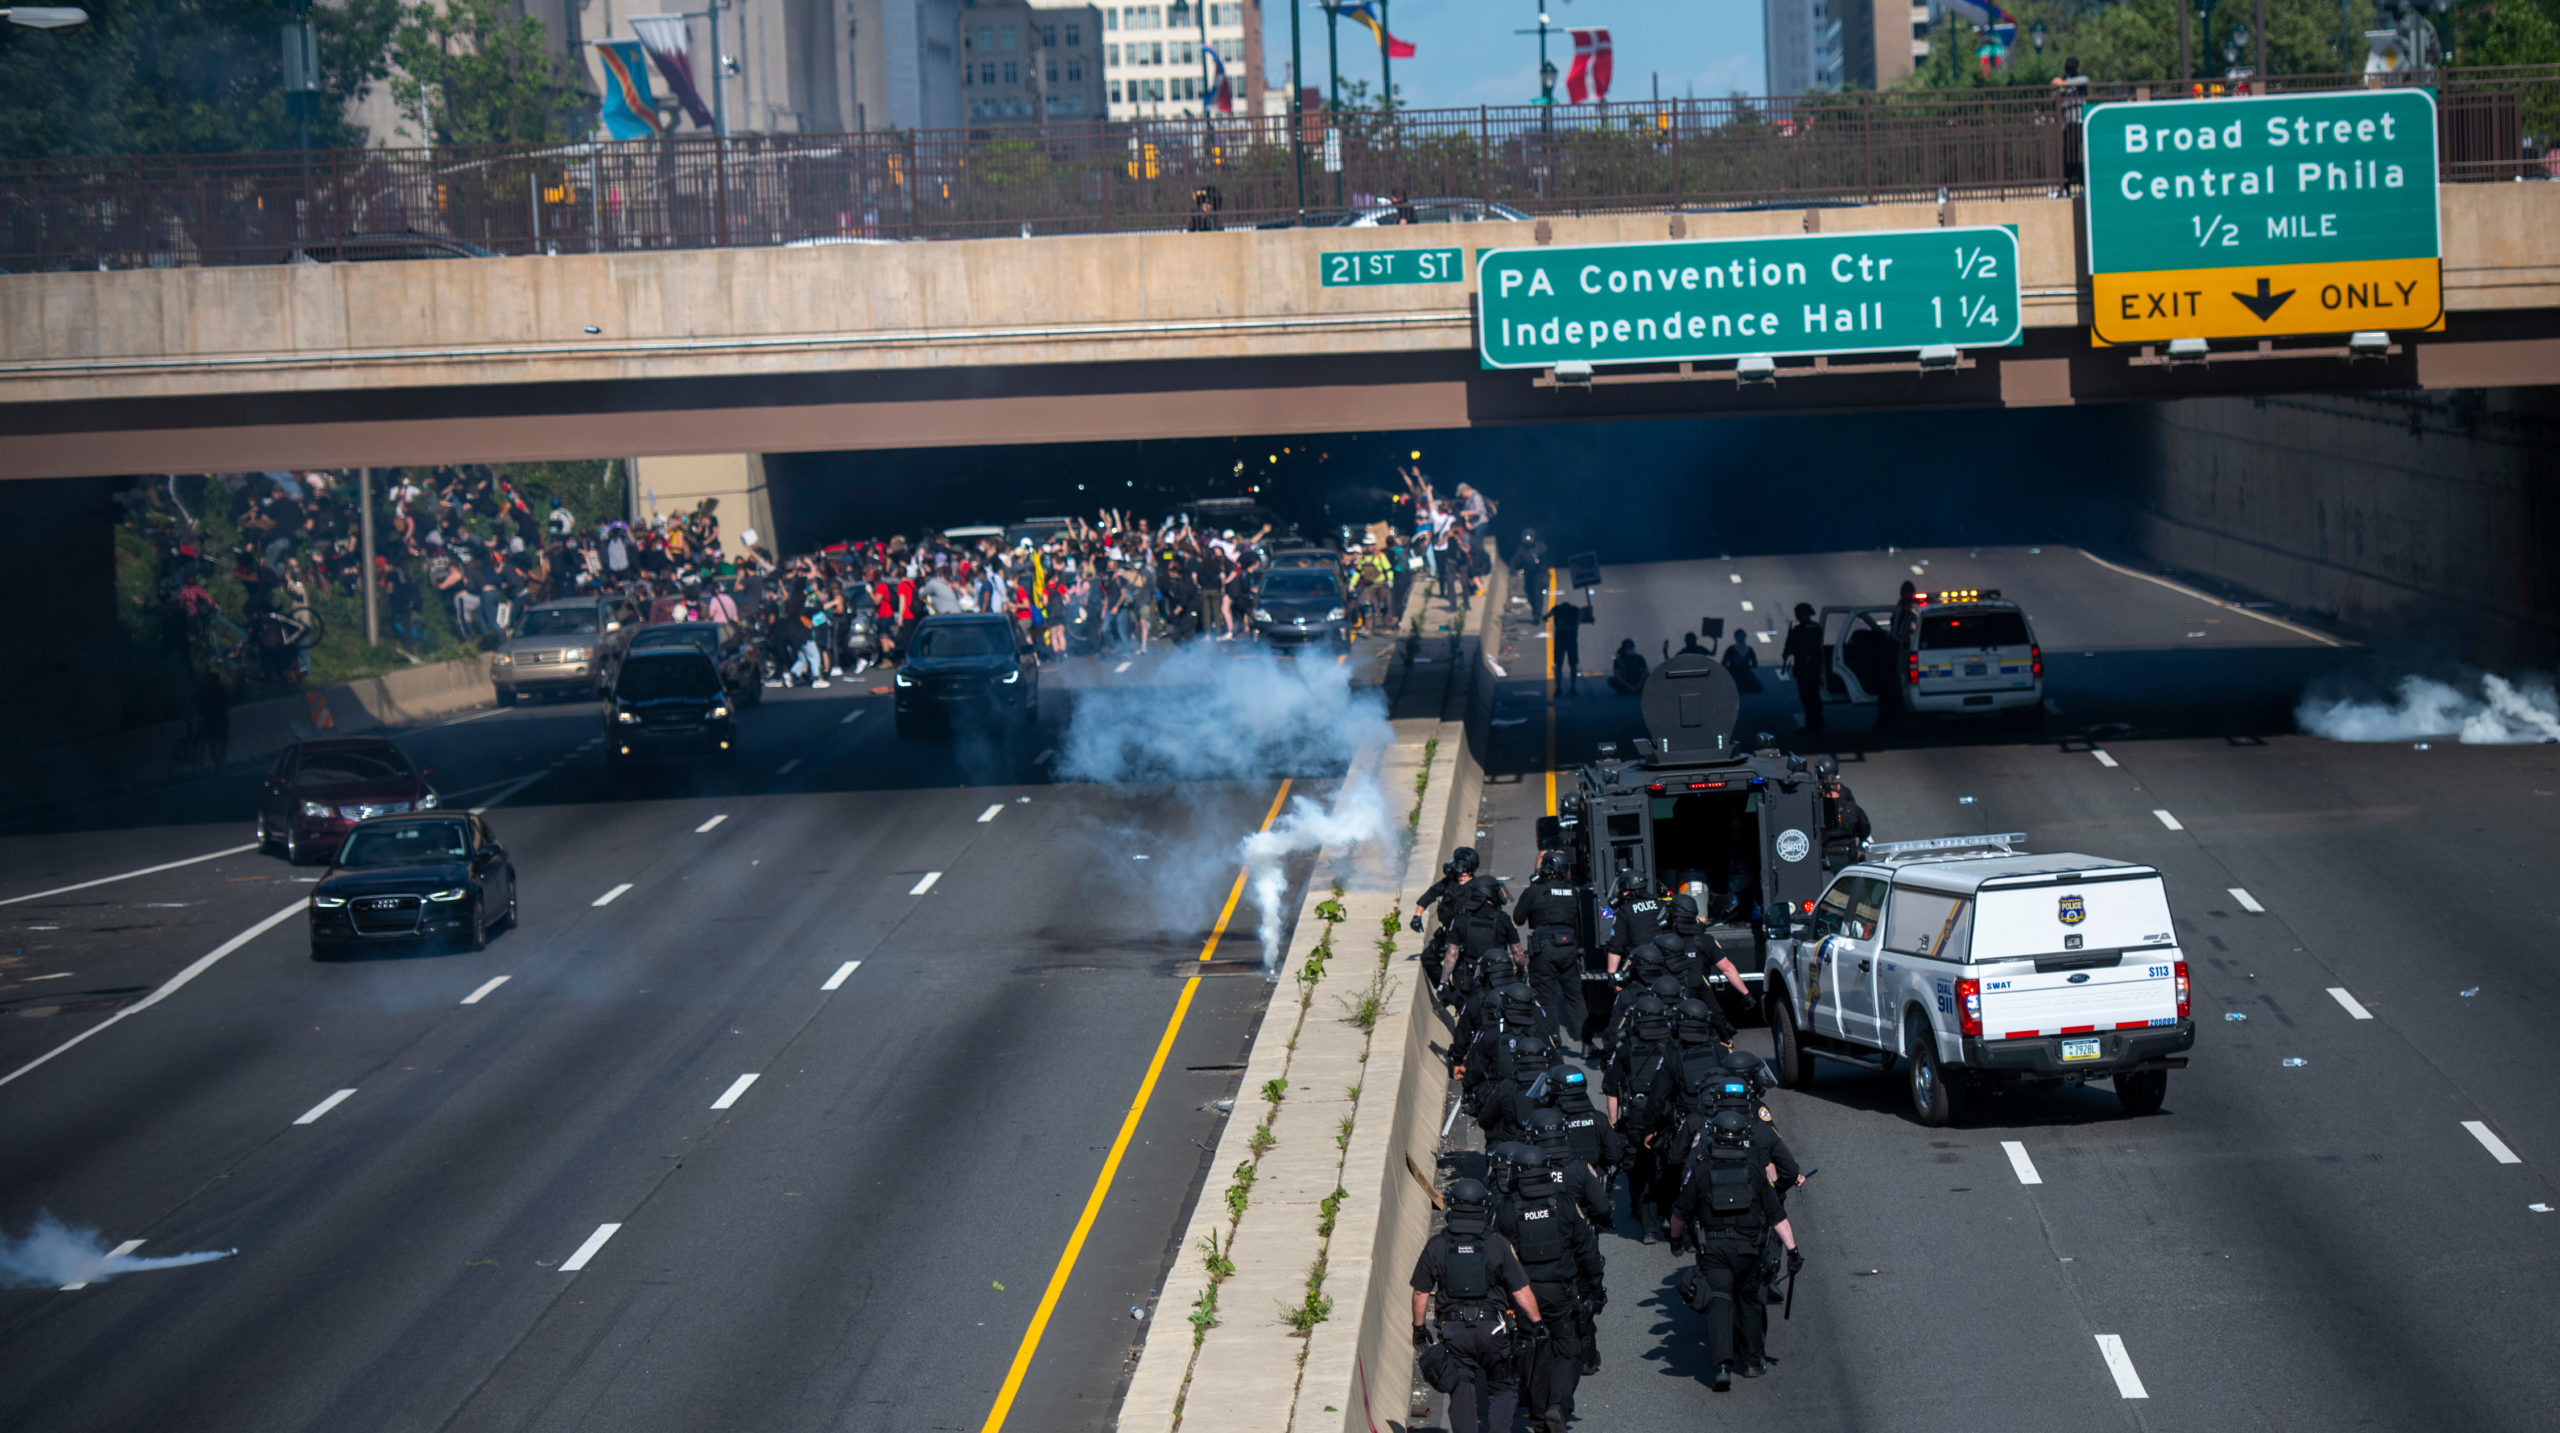 Protesters scramble in Centre City, Philadelphia after police launched tear gas at them near a tunnel exit. (Photo: Mark Makela, Getty Images)